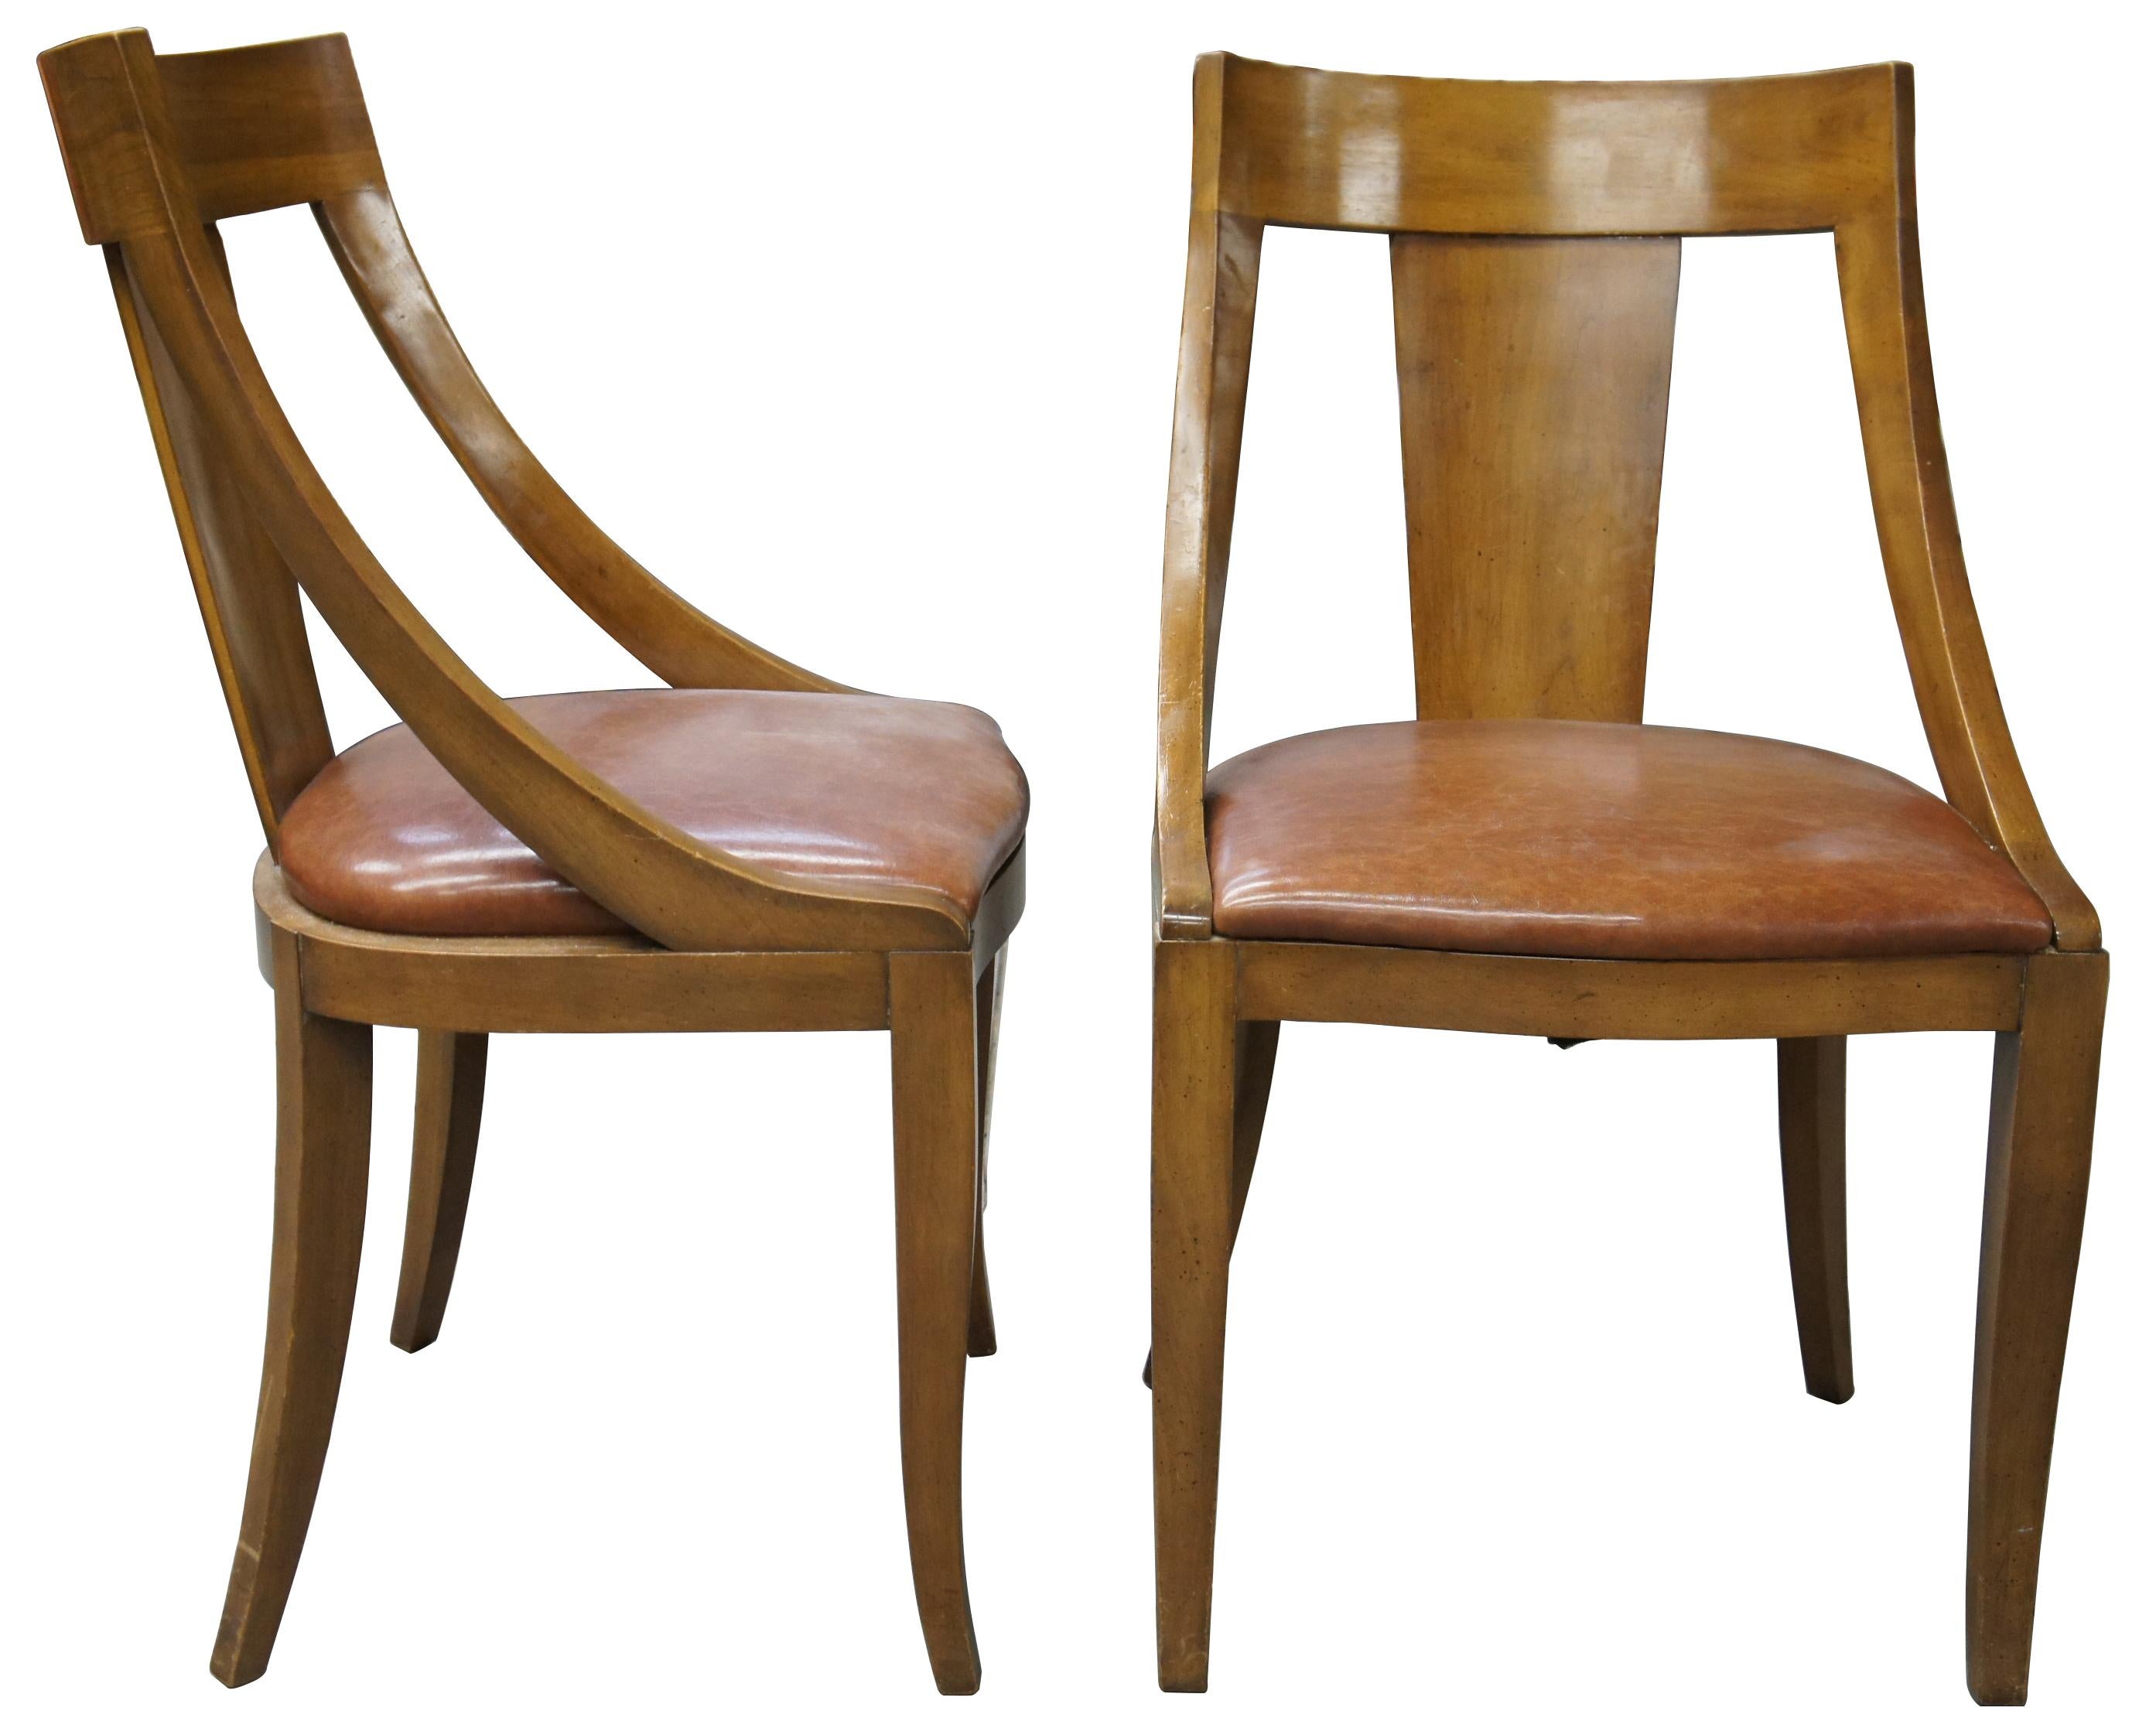 Italian Provincial dining chairs by Union National of Jamestown New York, circa 1950s. Made from fruitwood in French Empire form with Parma finish. Features a leather seat, tapered from legs and saber feet.
   